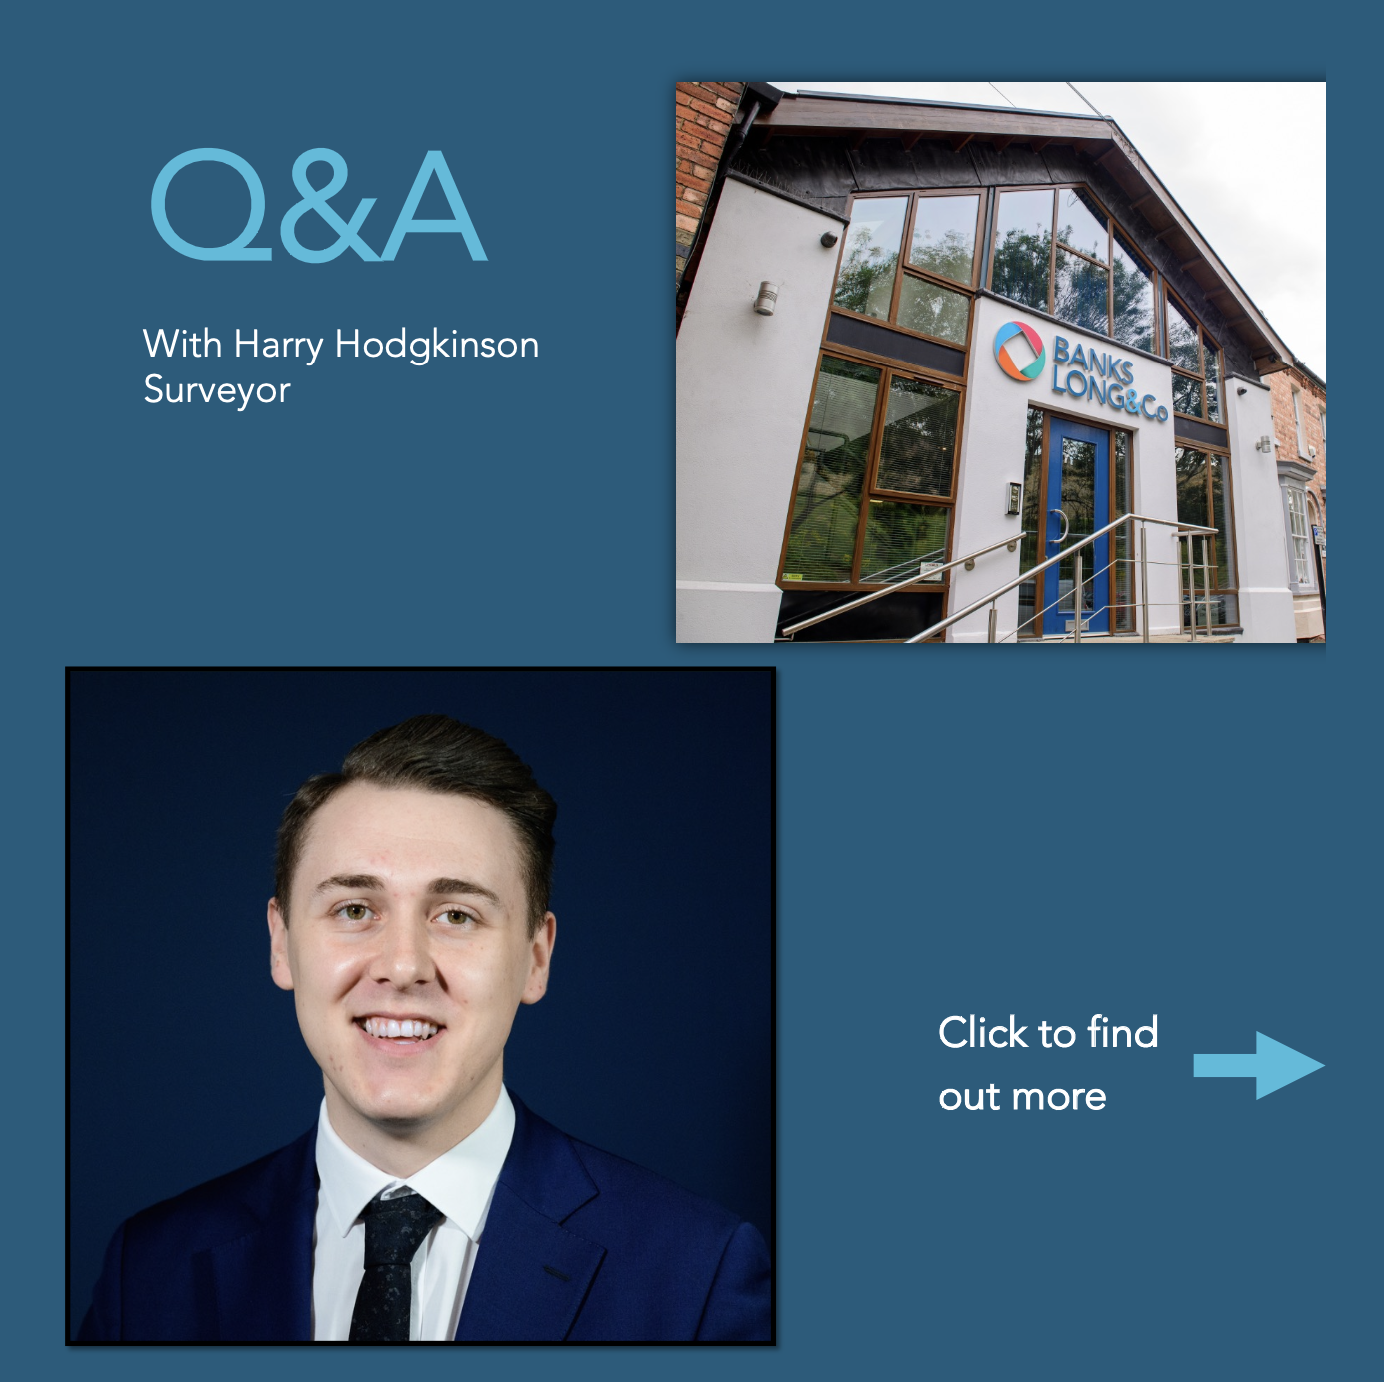 Featured image 1 for Q&A with Harry Hodgkinson, Surveyor at Banks Long & Co.